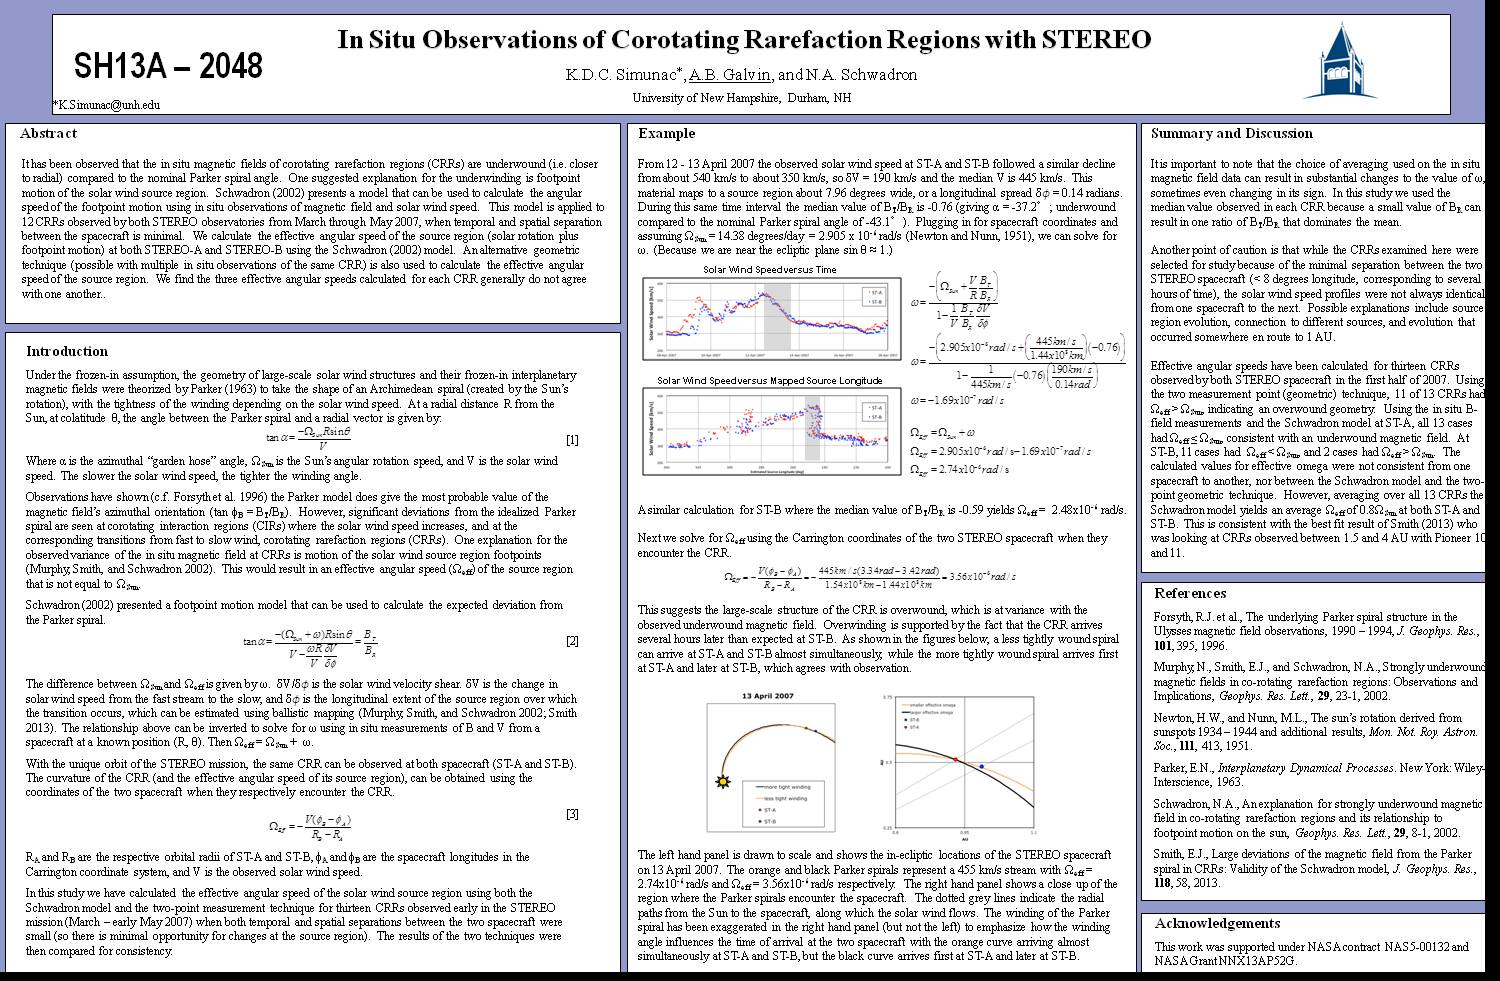 In Situ Observations Of Corotating Rarefaction Regions With Stereo by ksimunac